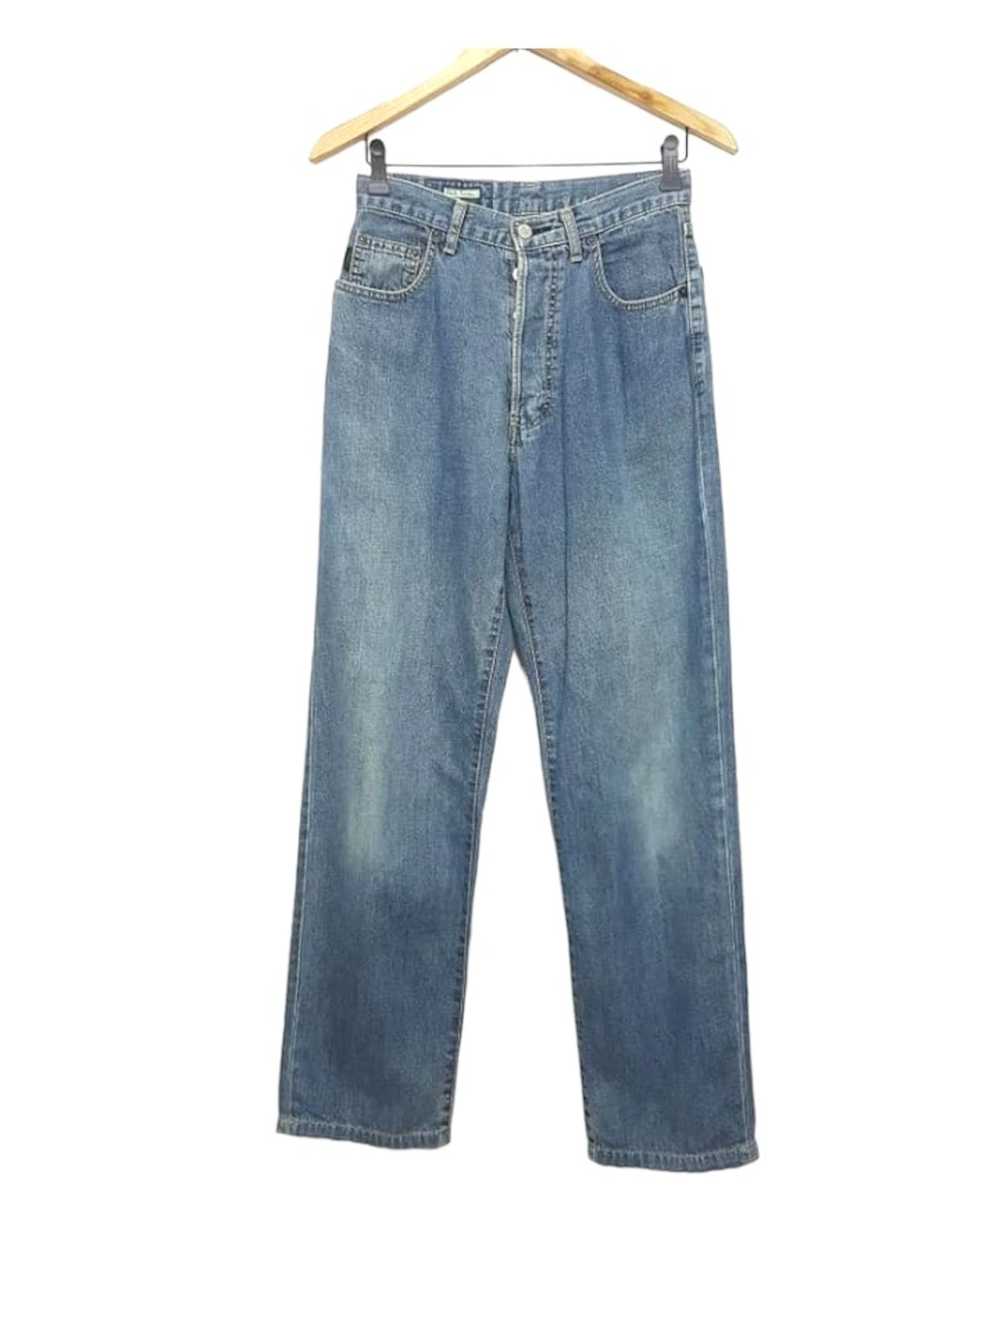 Paul Smith Paul Smith Button Fly Jeans MADE IN JA… - image 1